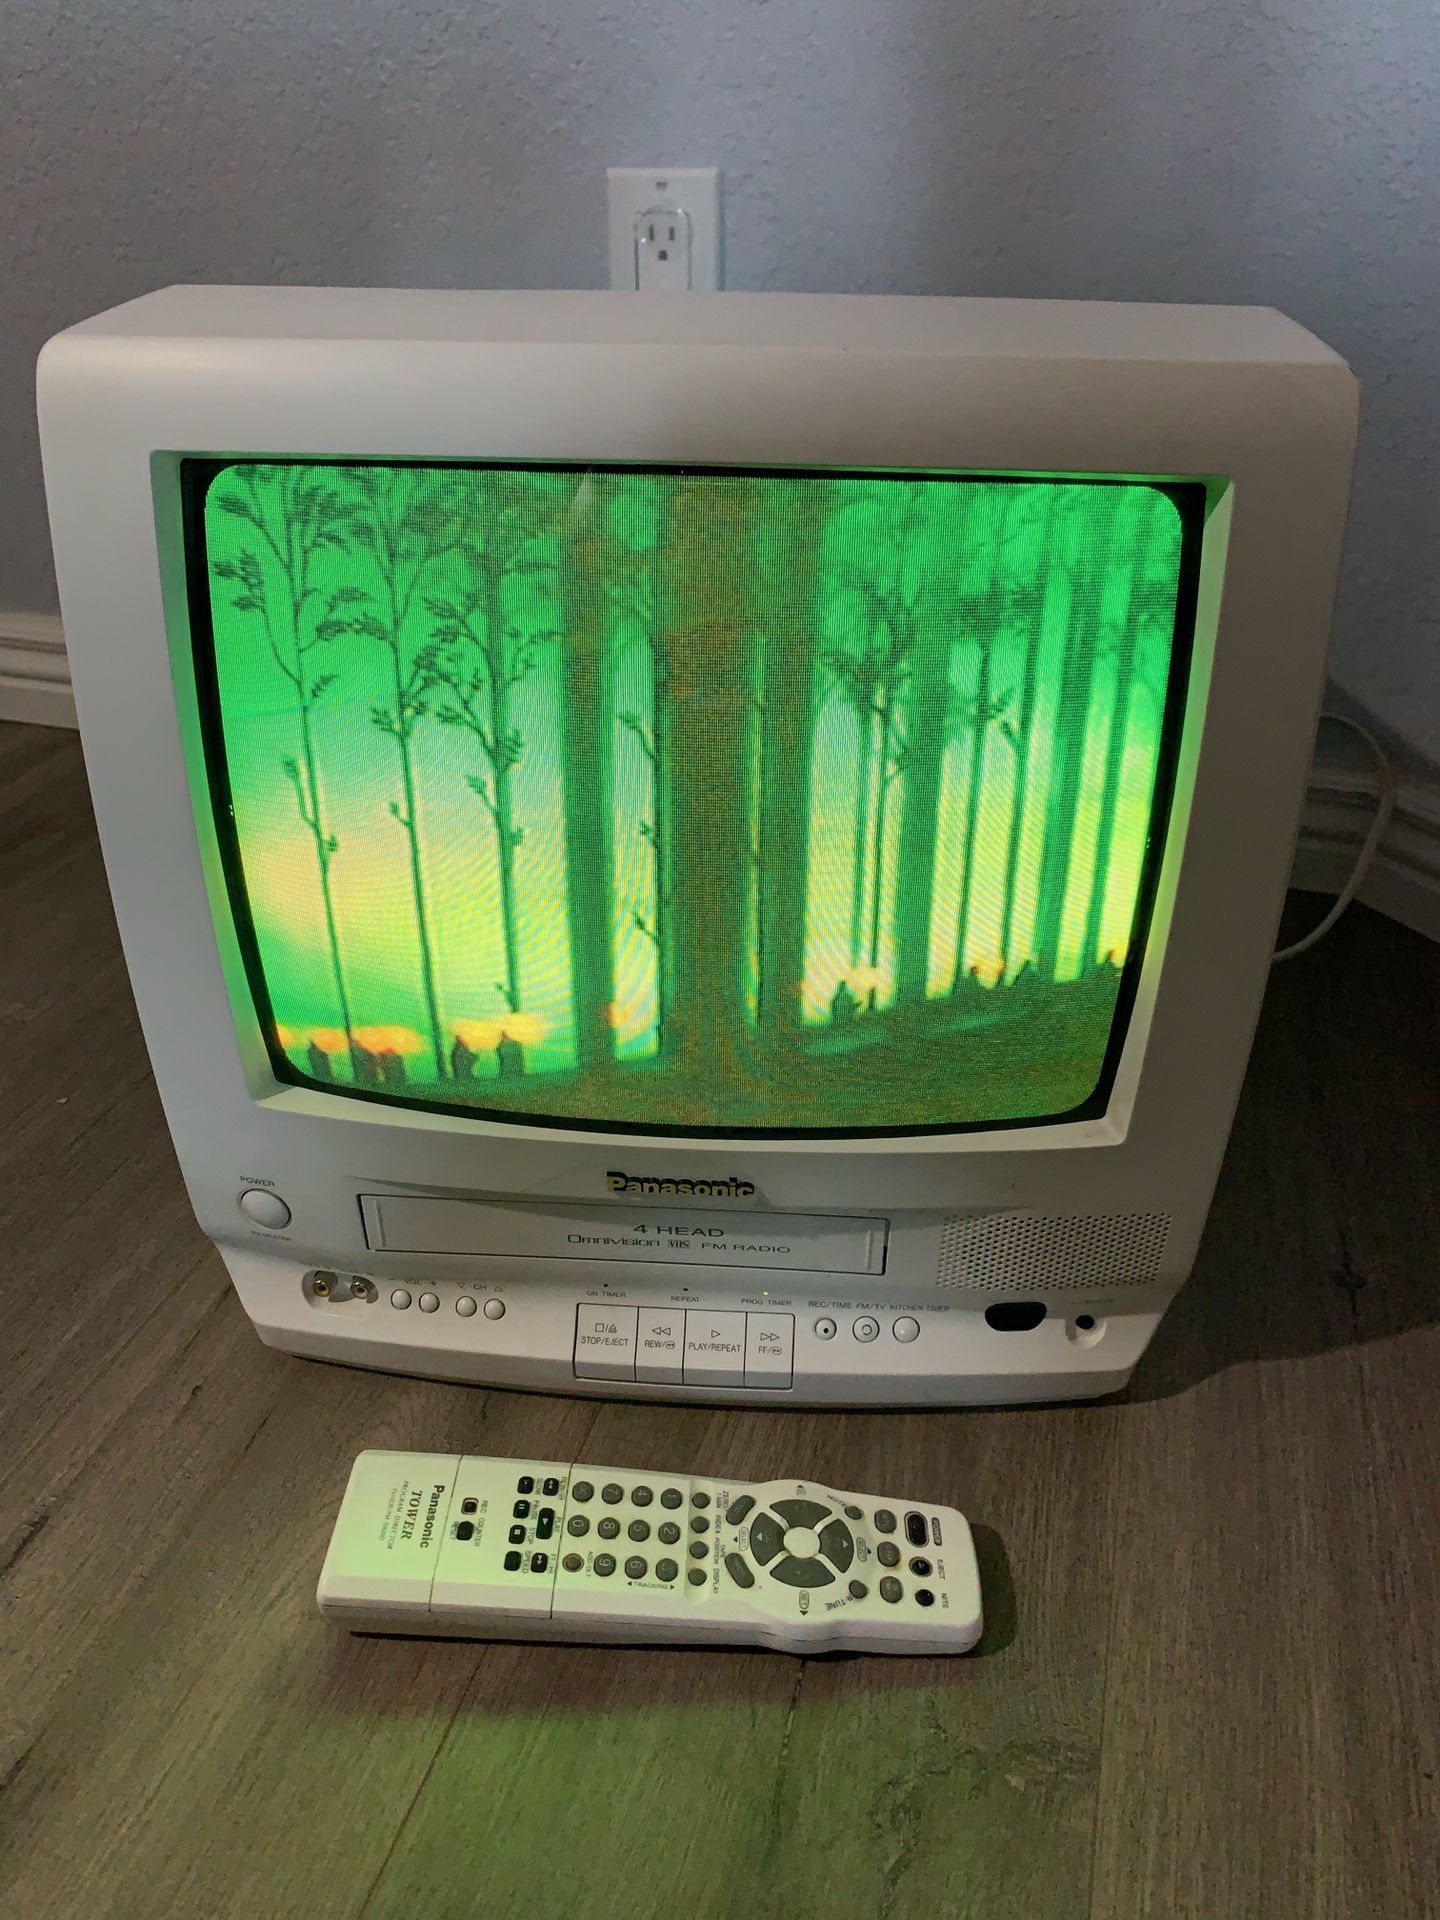 Panasonic TV VCR with remote